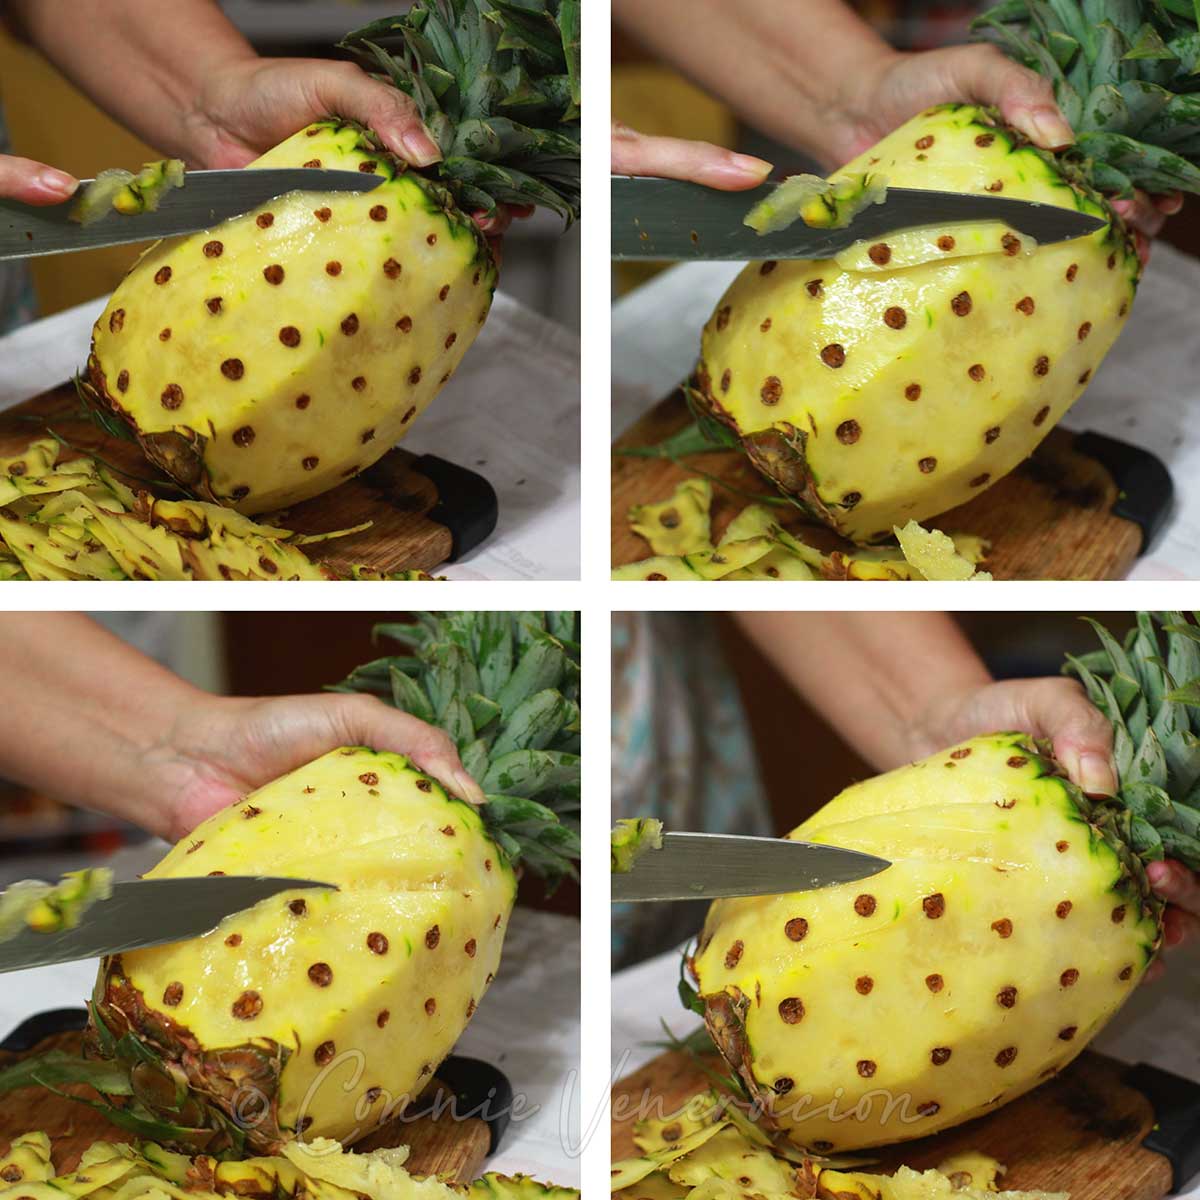 How to remove the pineapple "eyes" with no waste